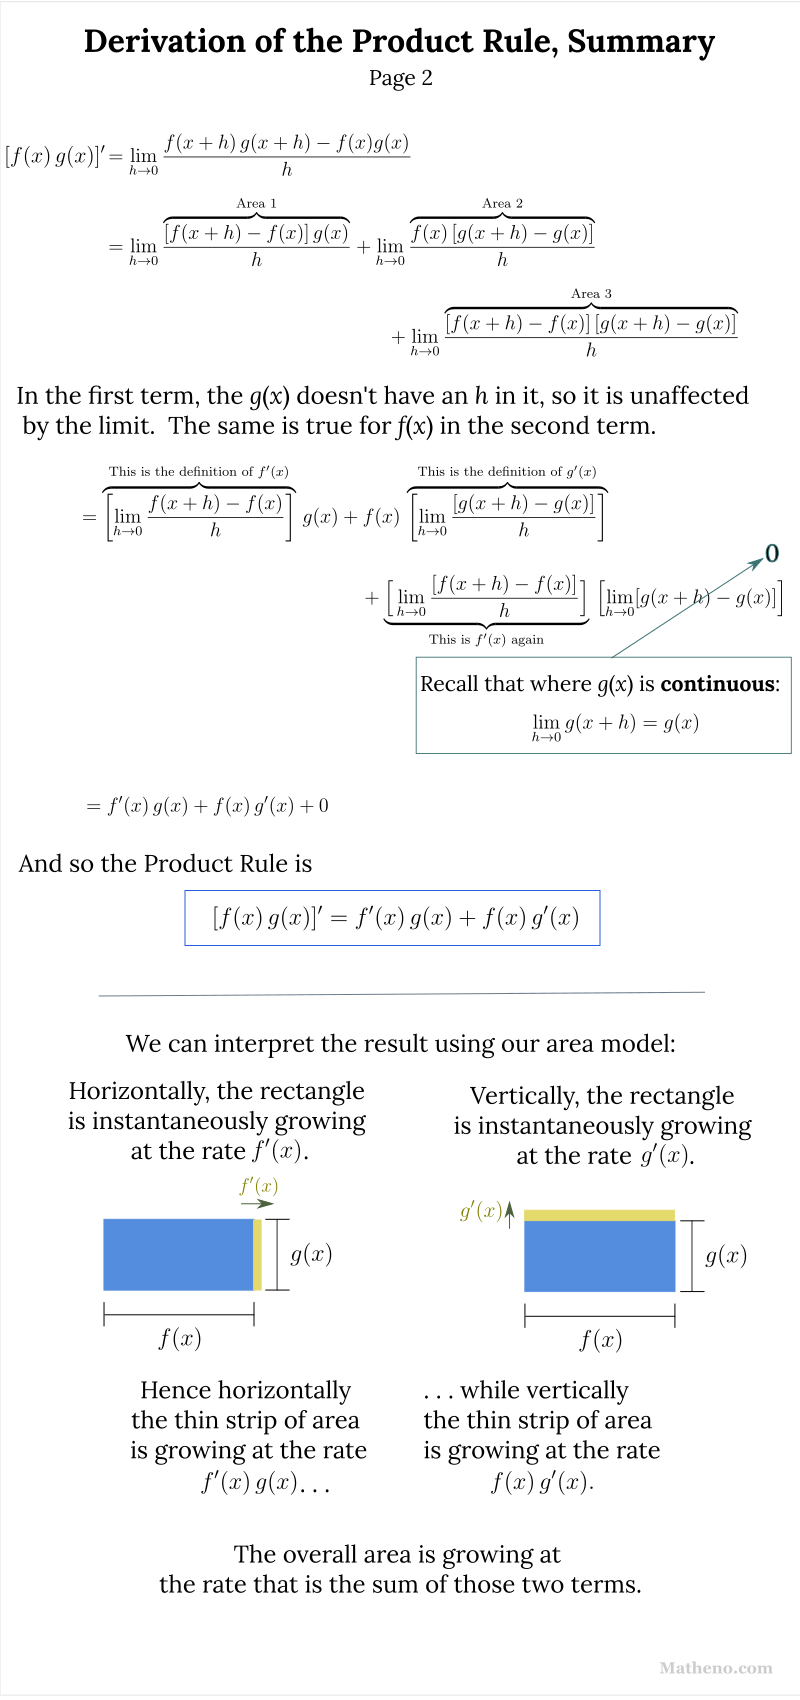 Summary of Product Rule derivation, page  of 2